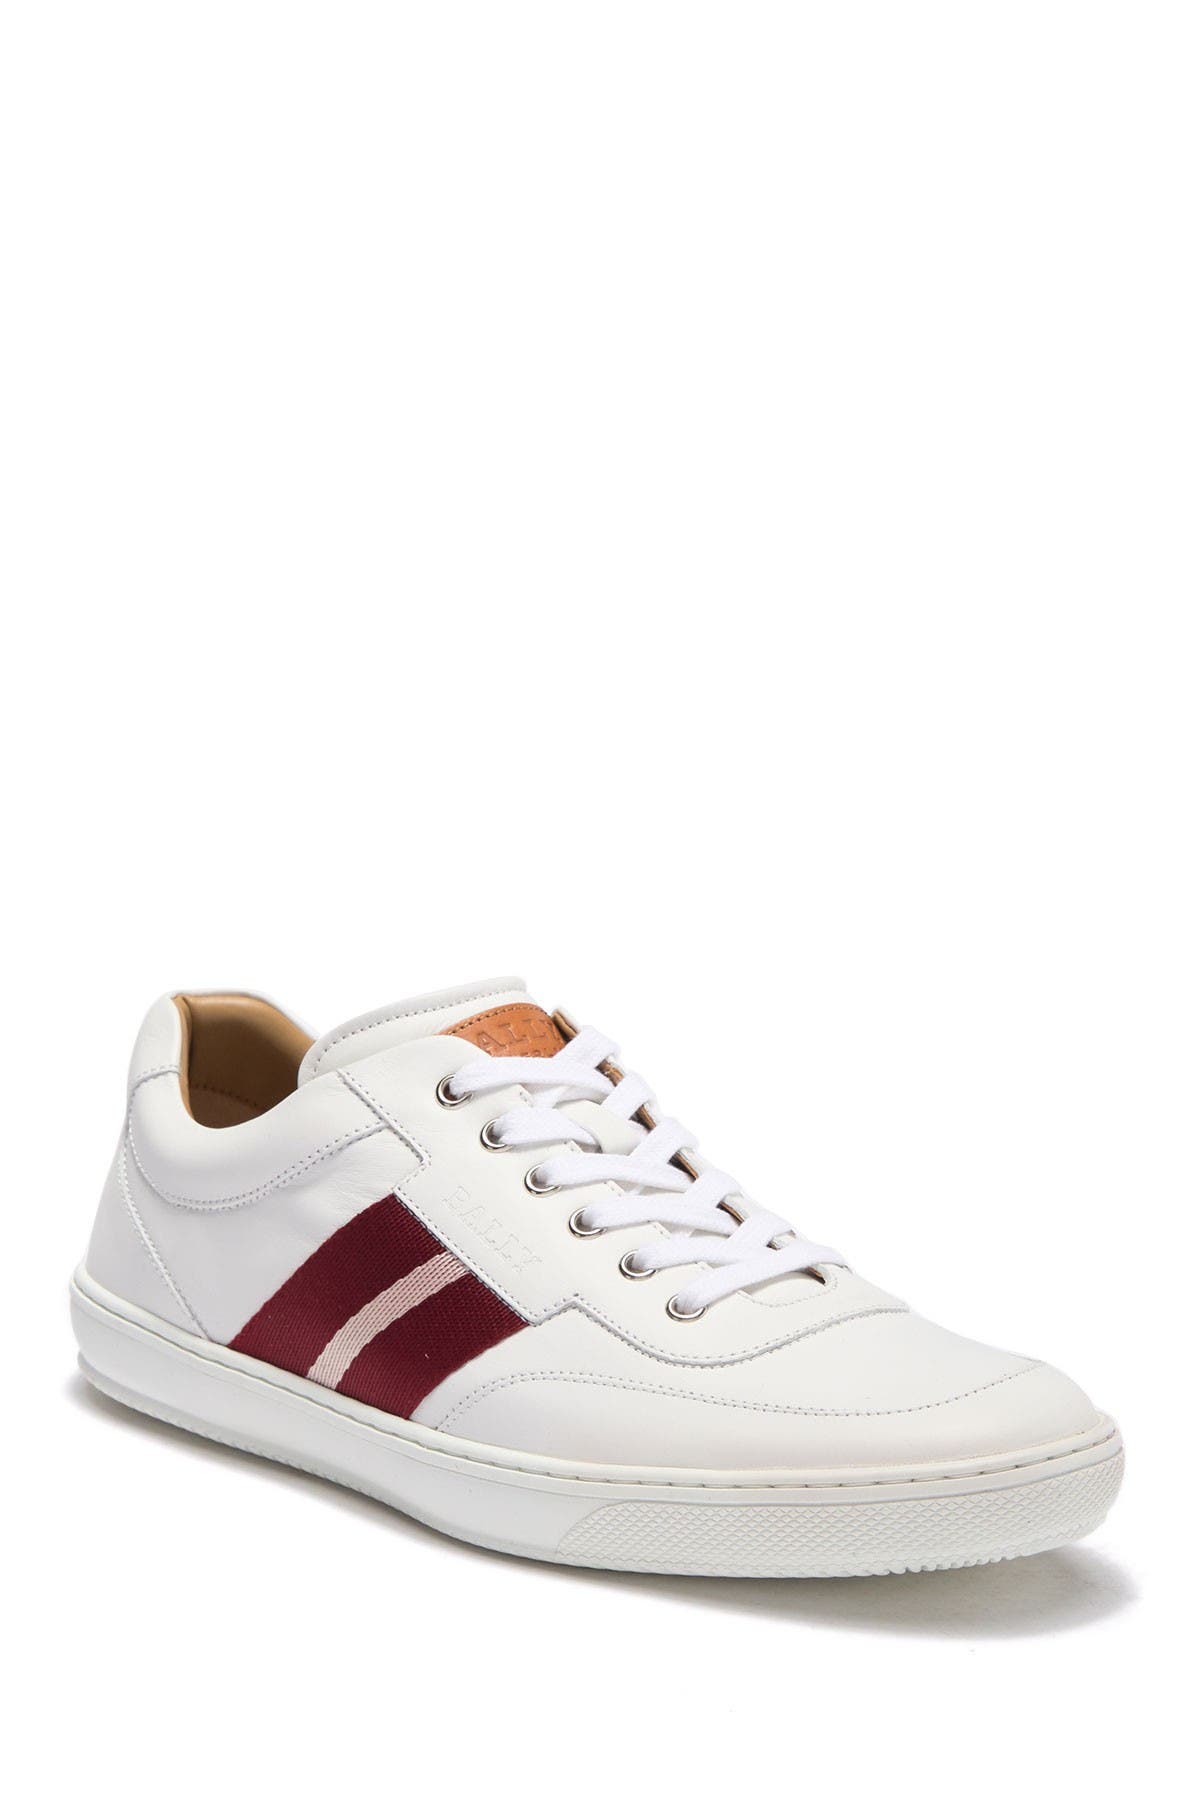 BALLY | Oriano Lace-Up Sneaker 